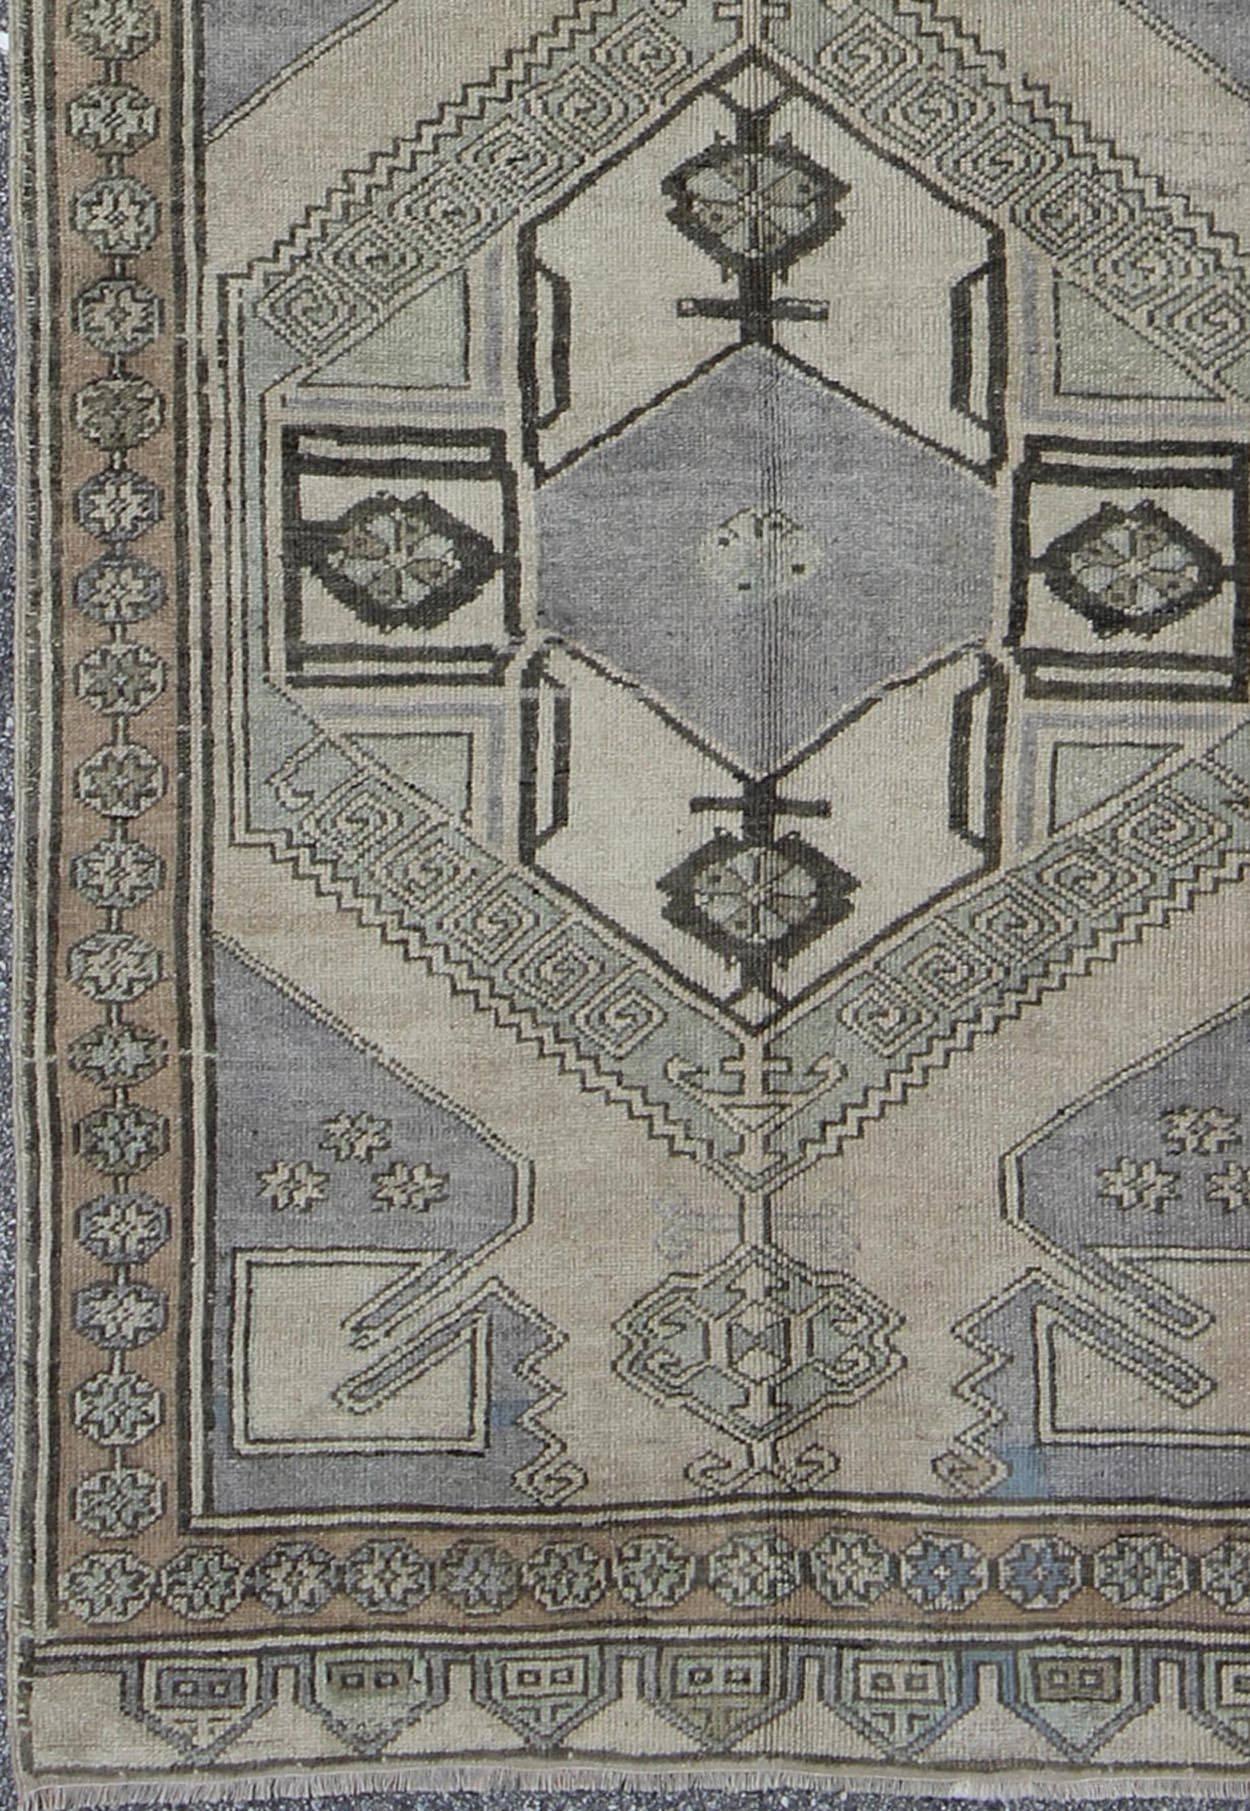 Mid-Century Turkish Oushak Vintage Runner with Dual Medallions in Lavender, Gray, rug fah-95194, country of origin / type: Turkey/Oushak, circa mid-20th century

This Mid-Century Turkish runner features a dual central medallion design as well as